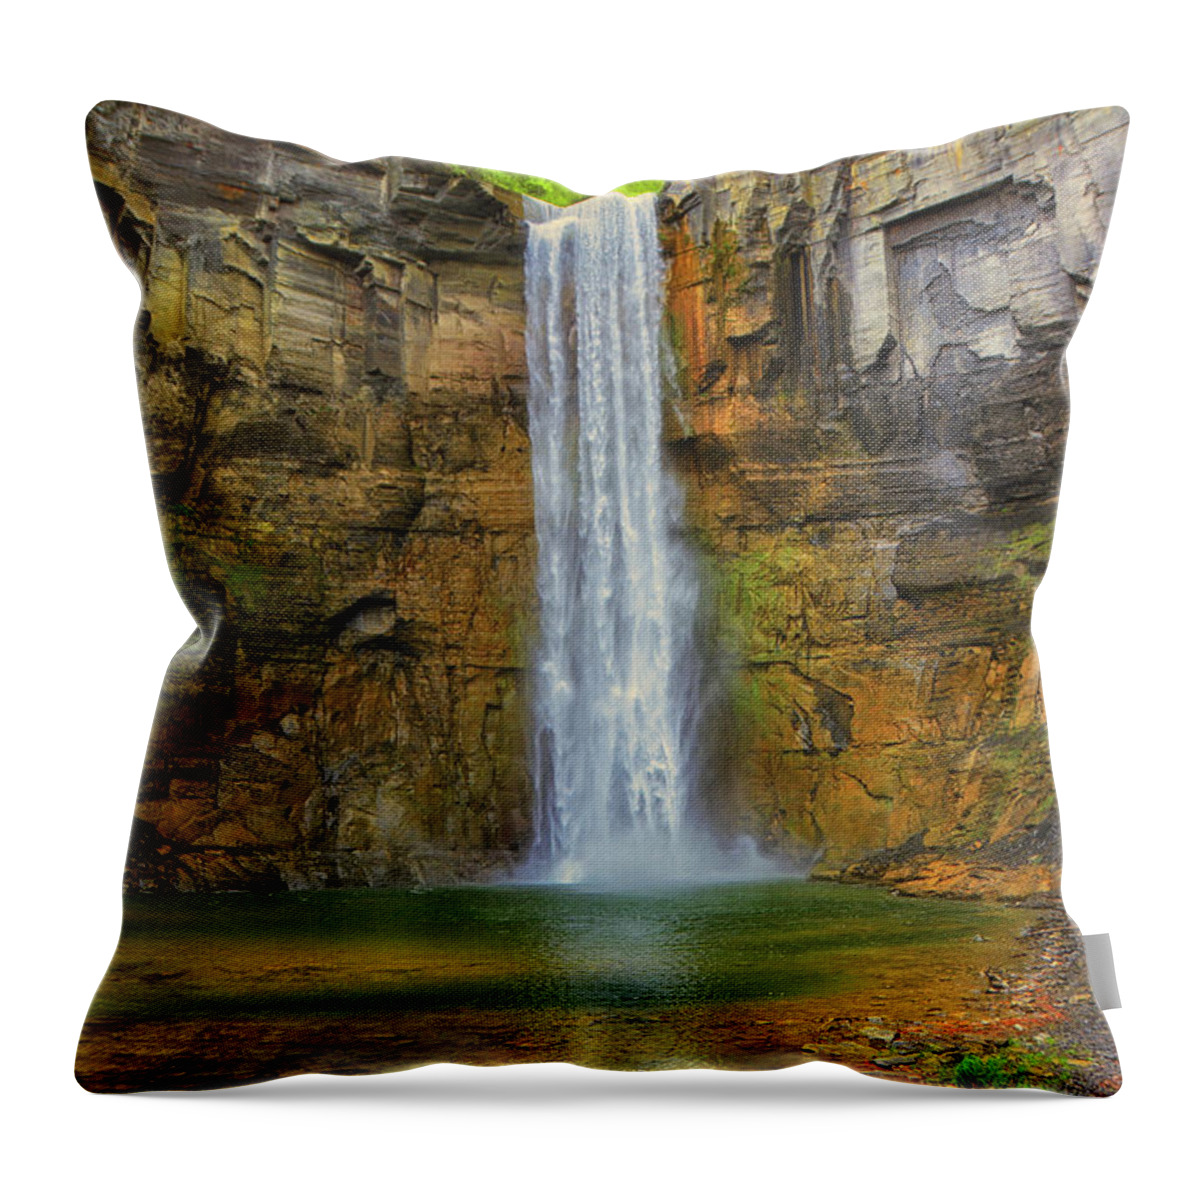 Taughannock Falls Throw Pillow featuring the photograph Taughannock Falls by Raymond Salani III